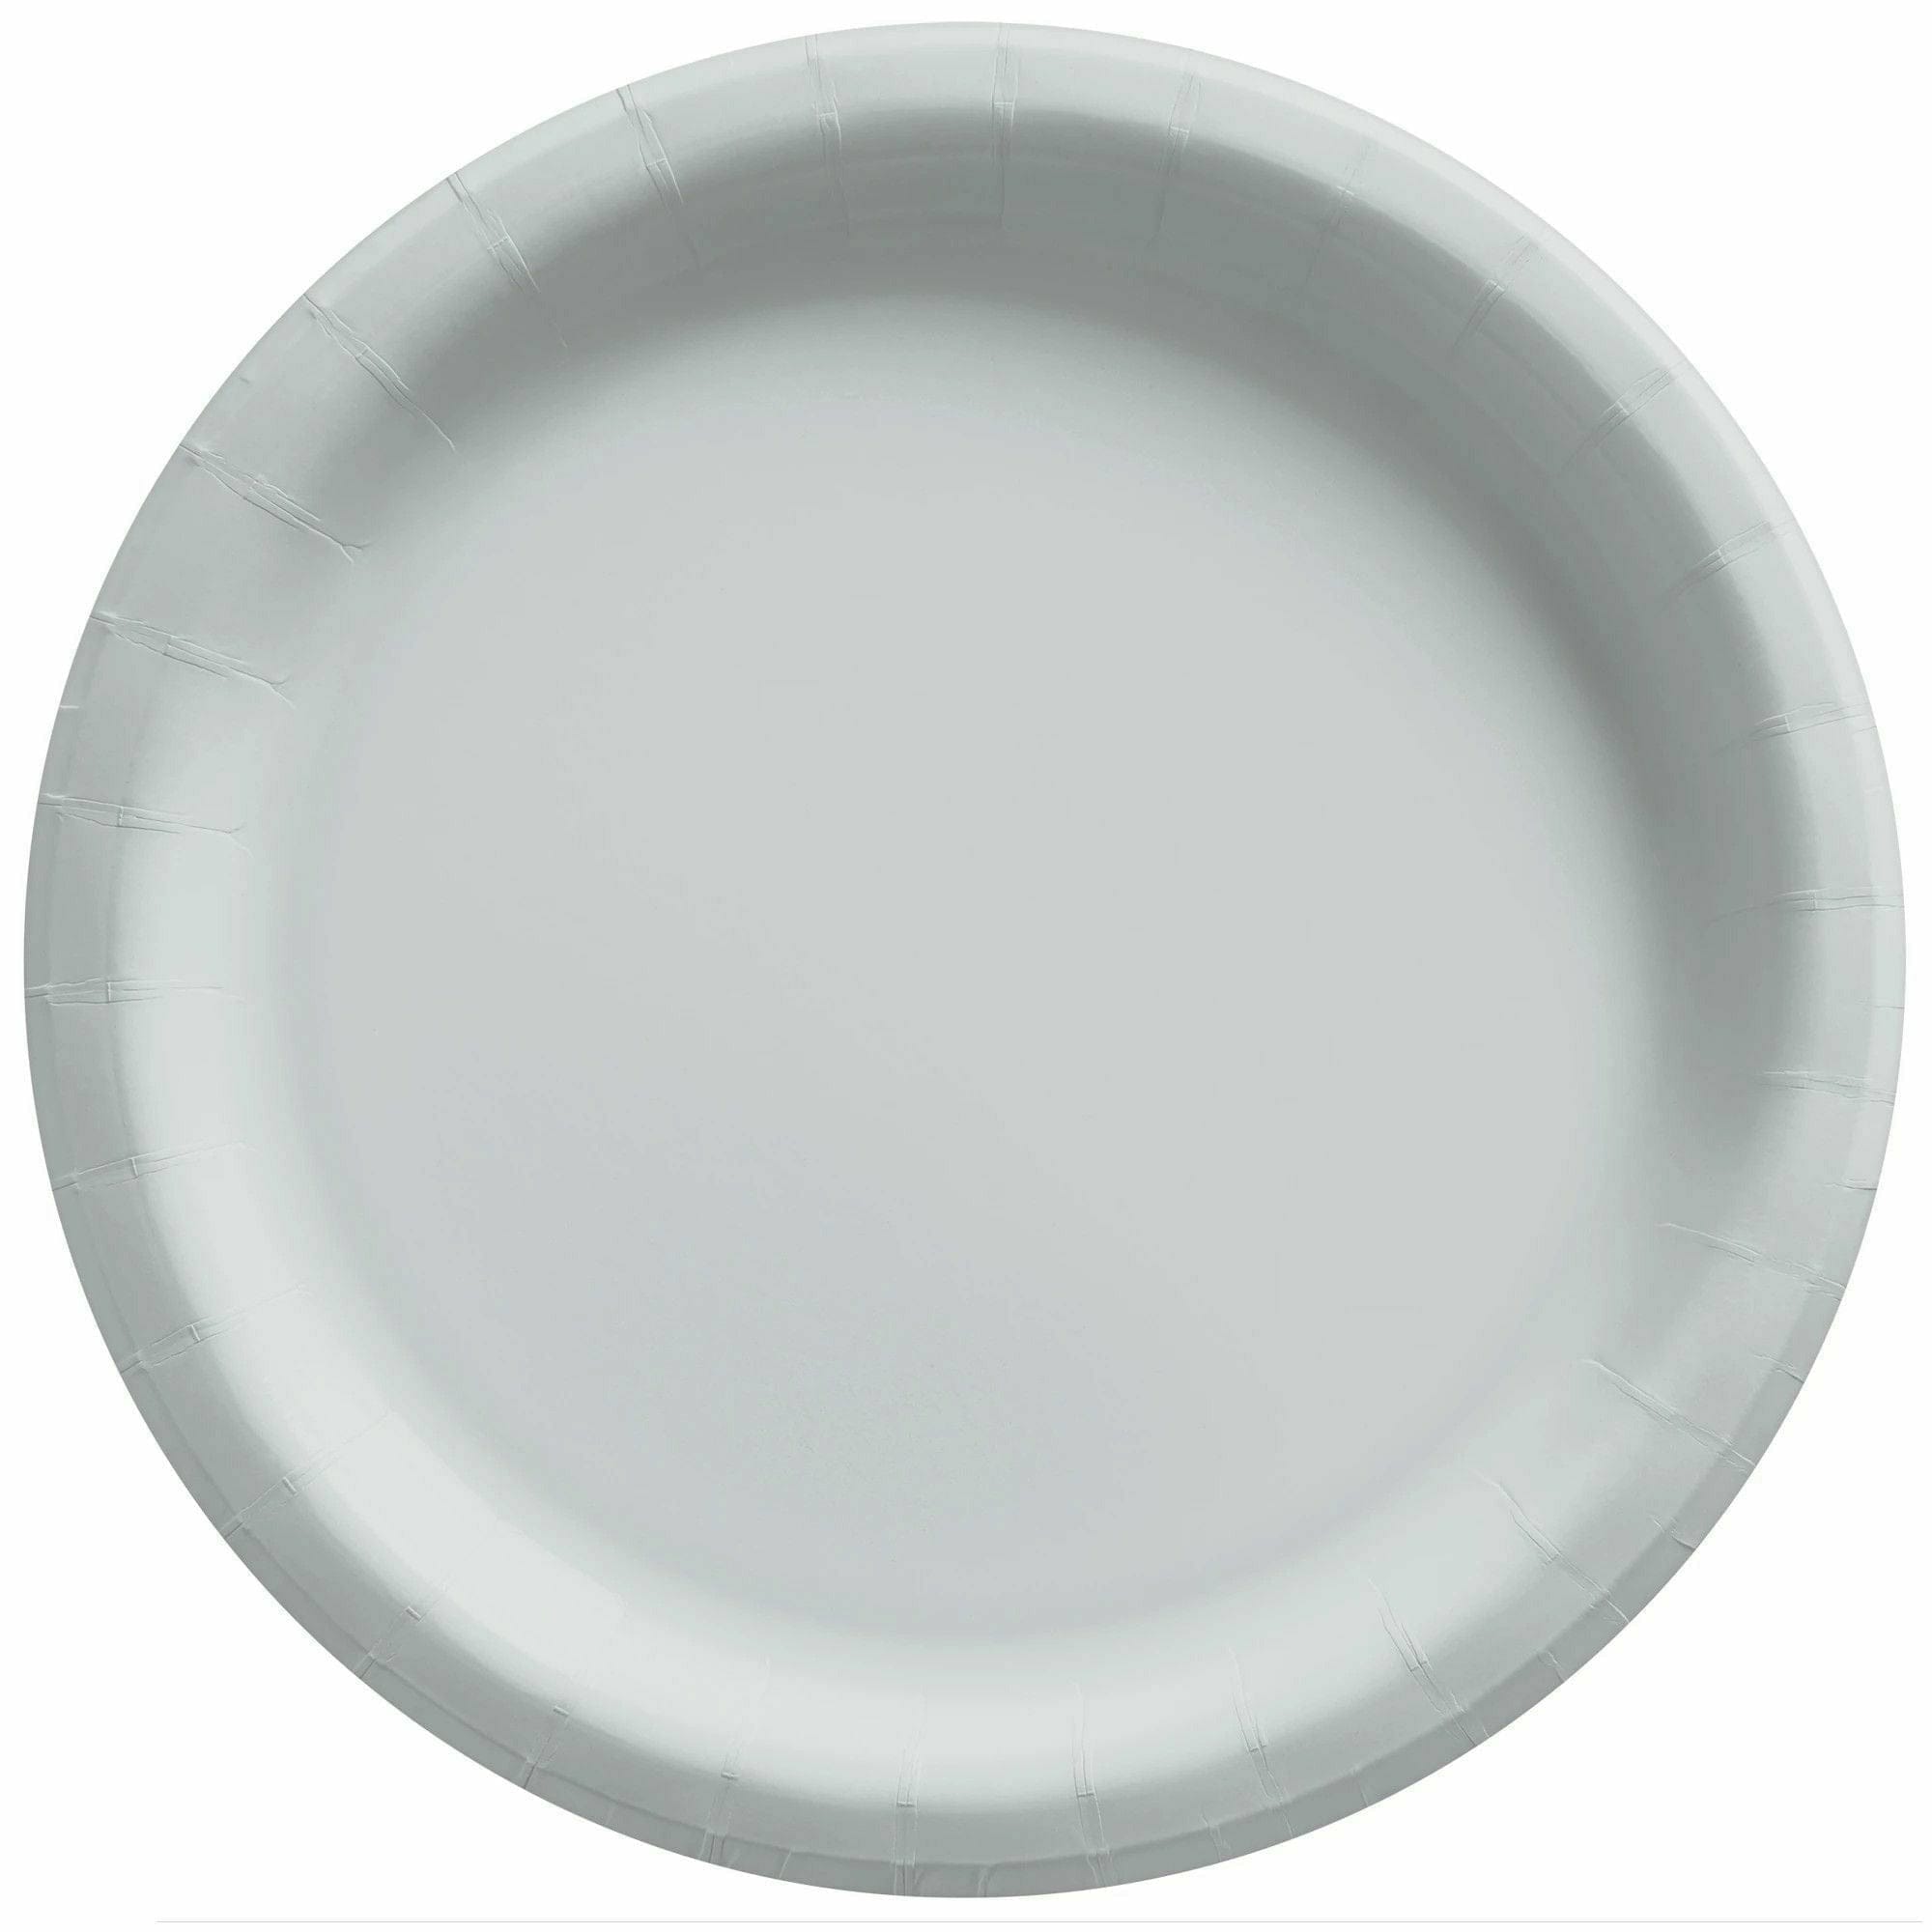 Amscan BASIC Silver - 10" Paper Lunch Plates 20ct